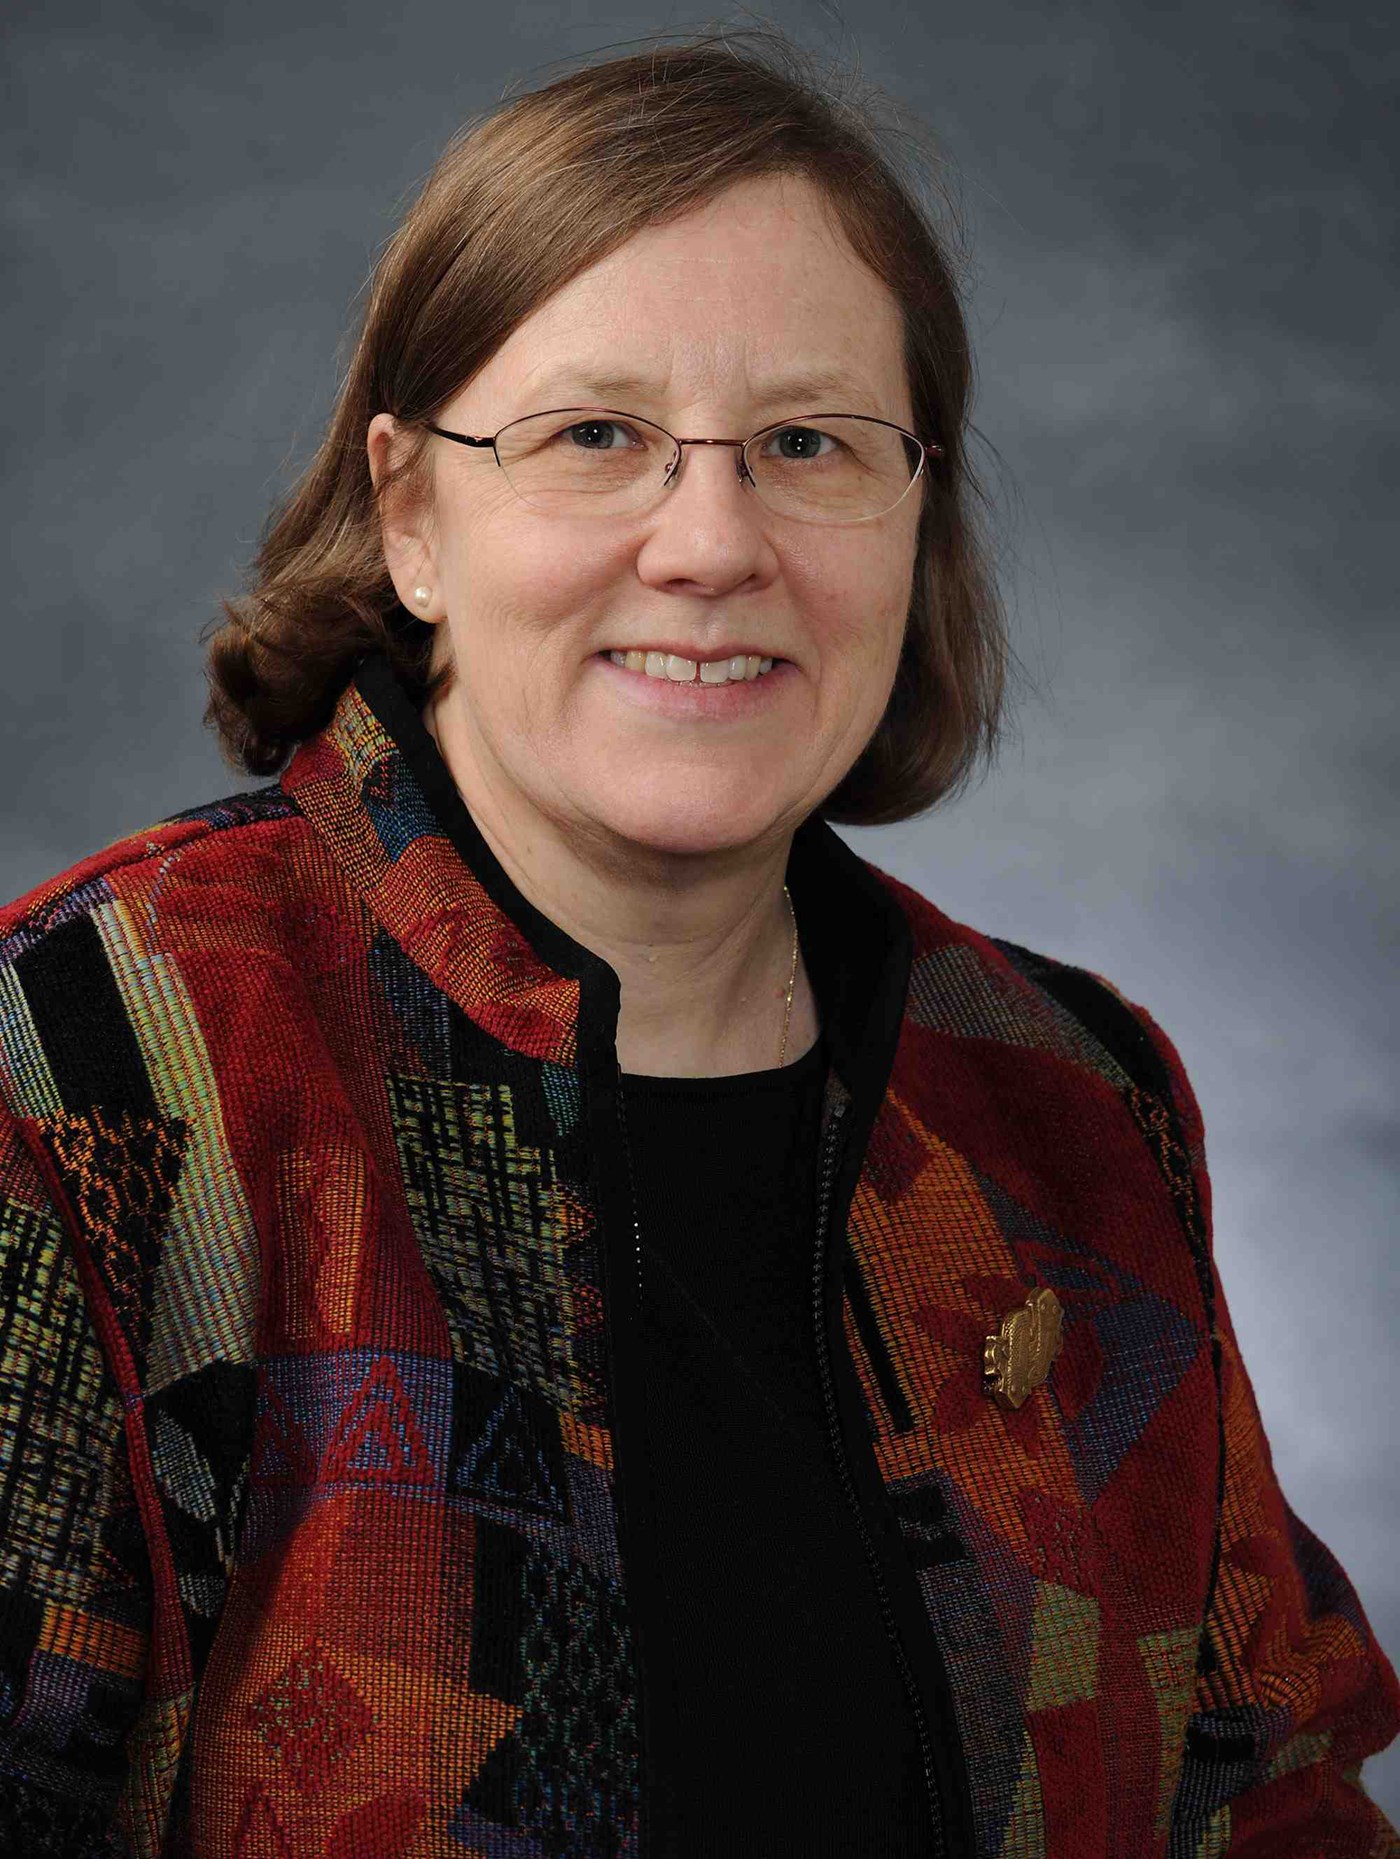 Janet Schrenk is an Associate Teaching Professor in the Chemistry Department at UMass Lowell.